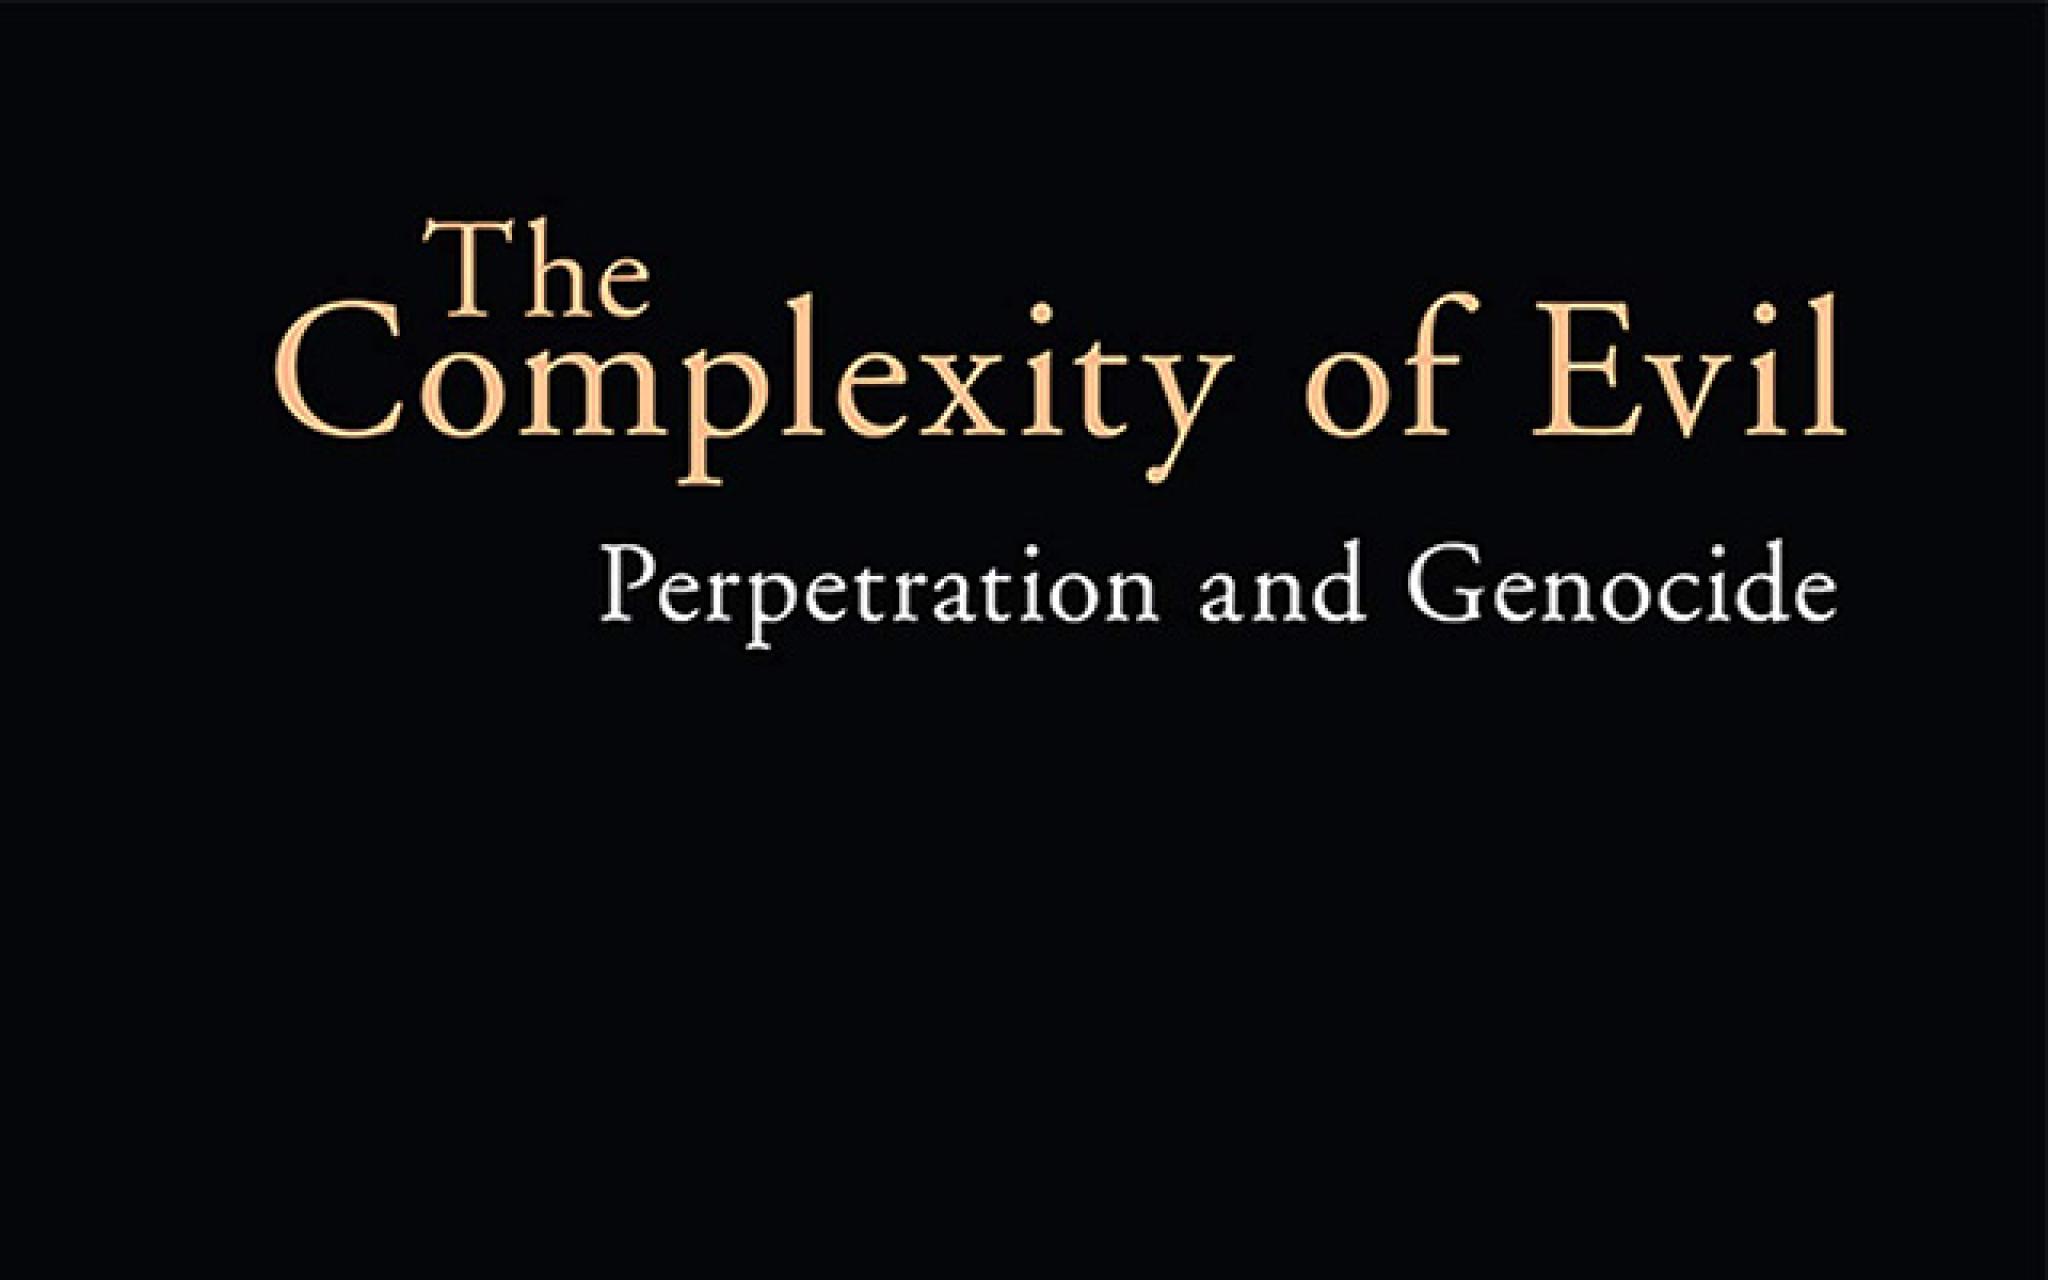 Book cover: Complexity of Evil by Timothy Williams